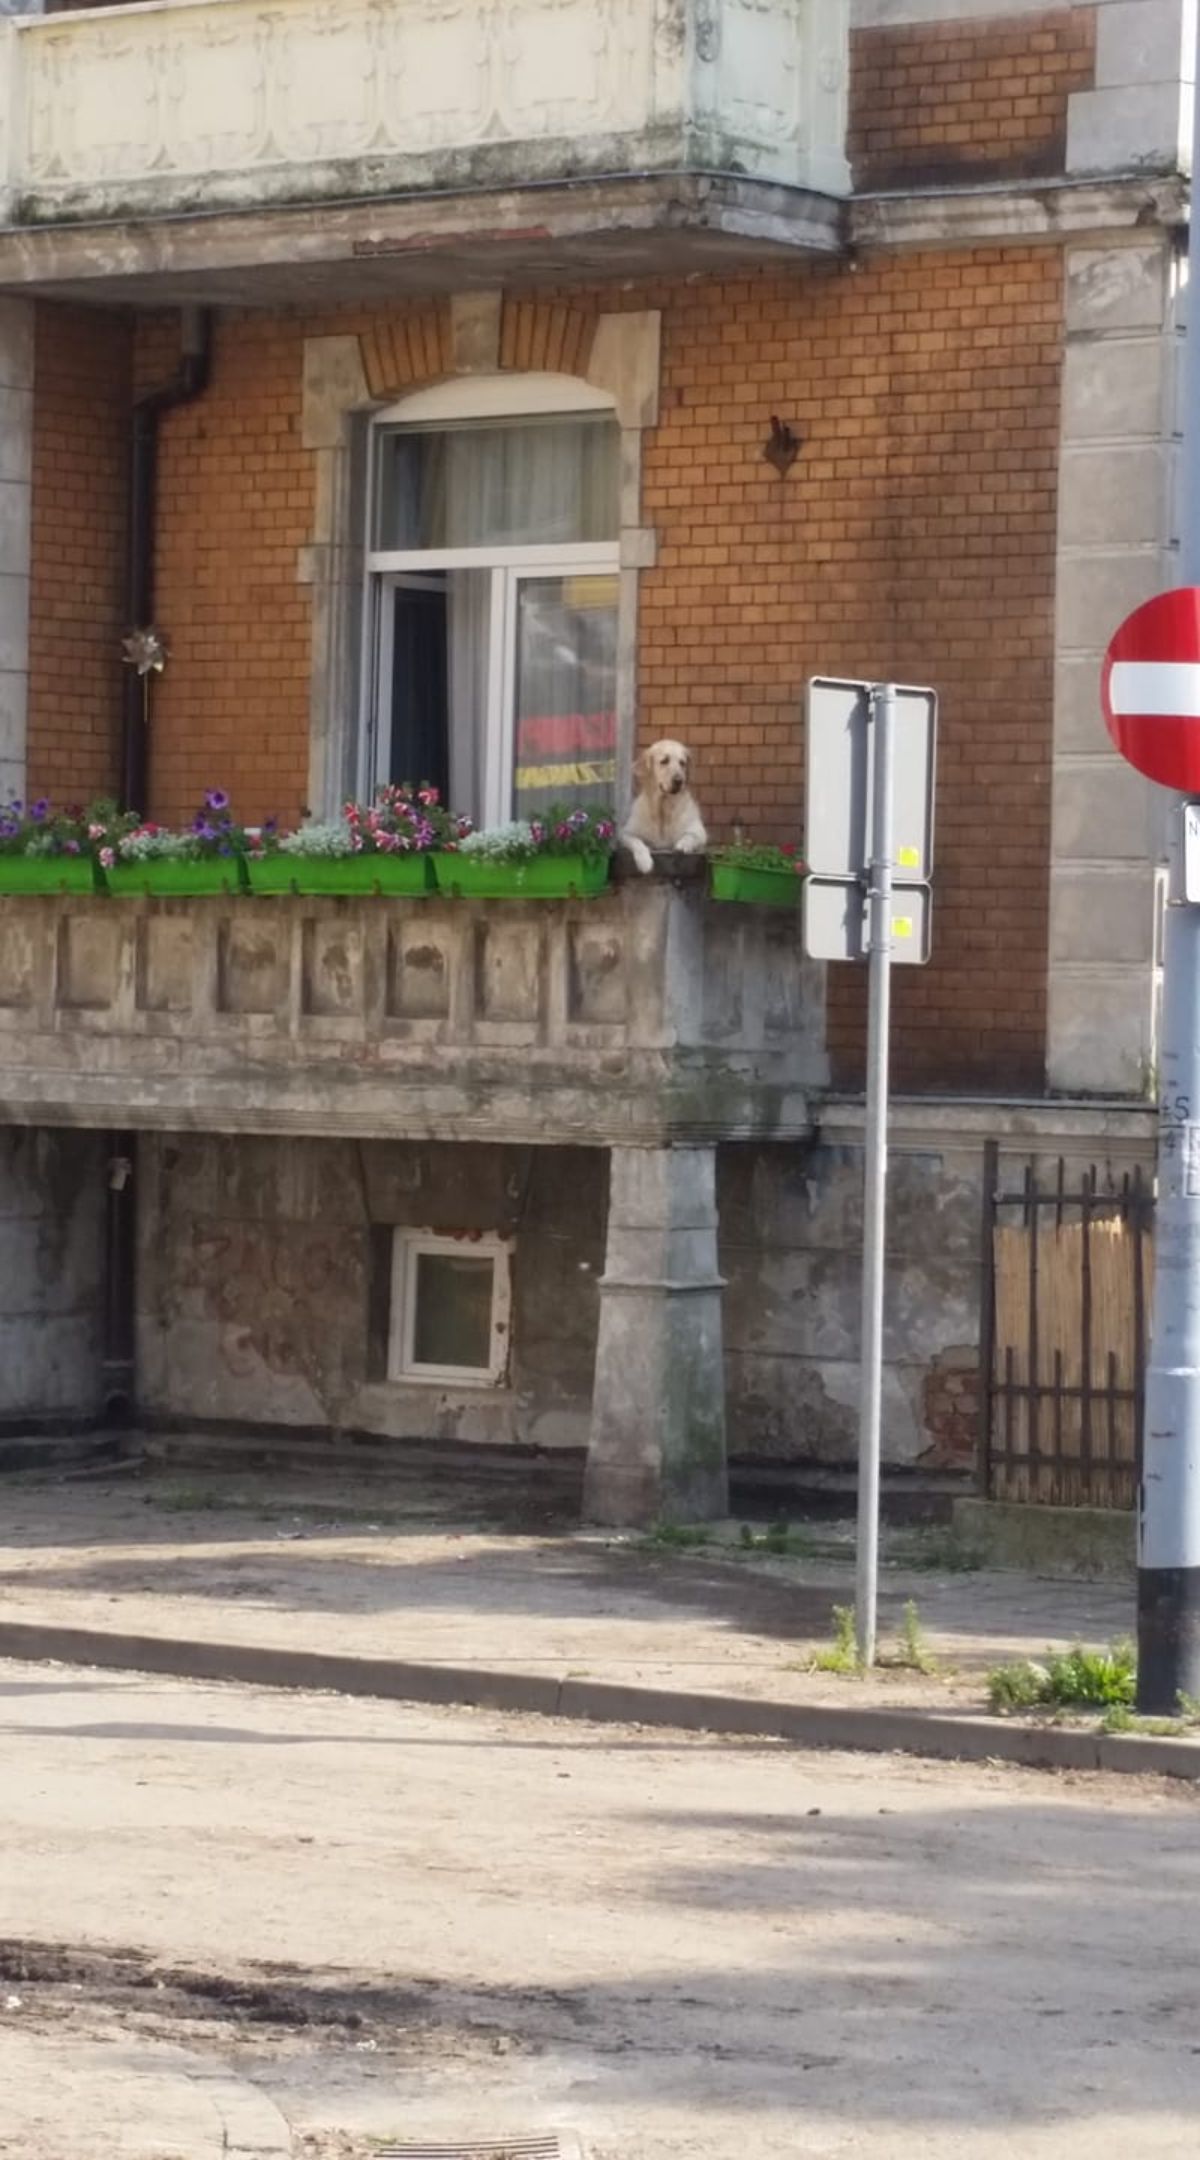 zoomed out photo of golden retriever hanging over a balcony with green flower pots with lots of pink flowers